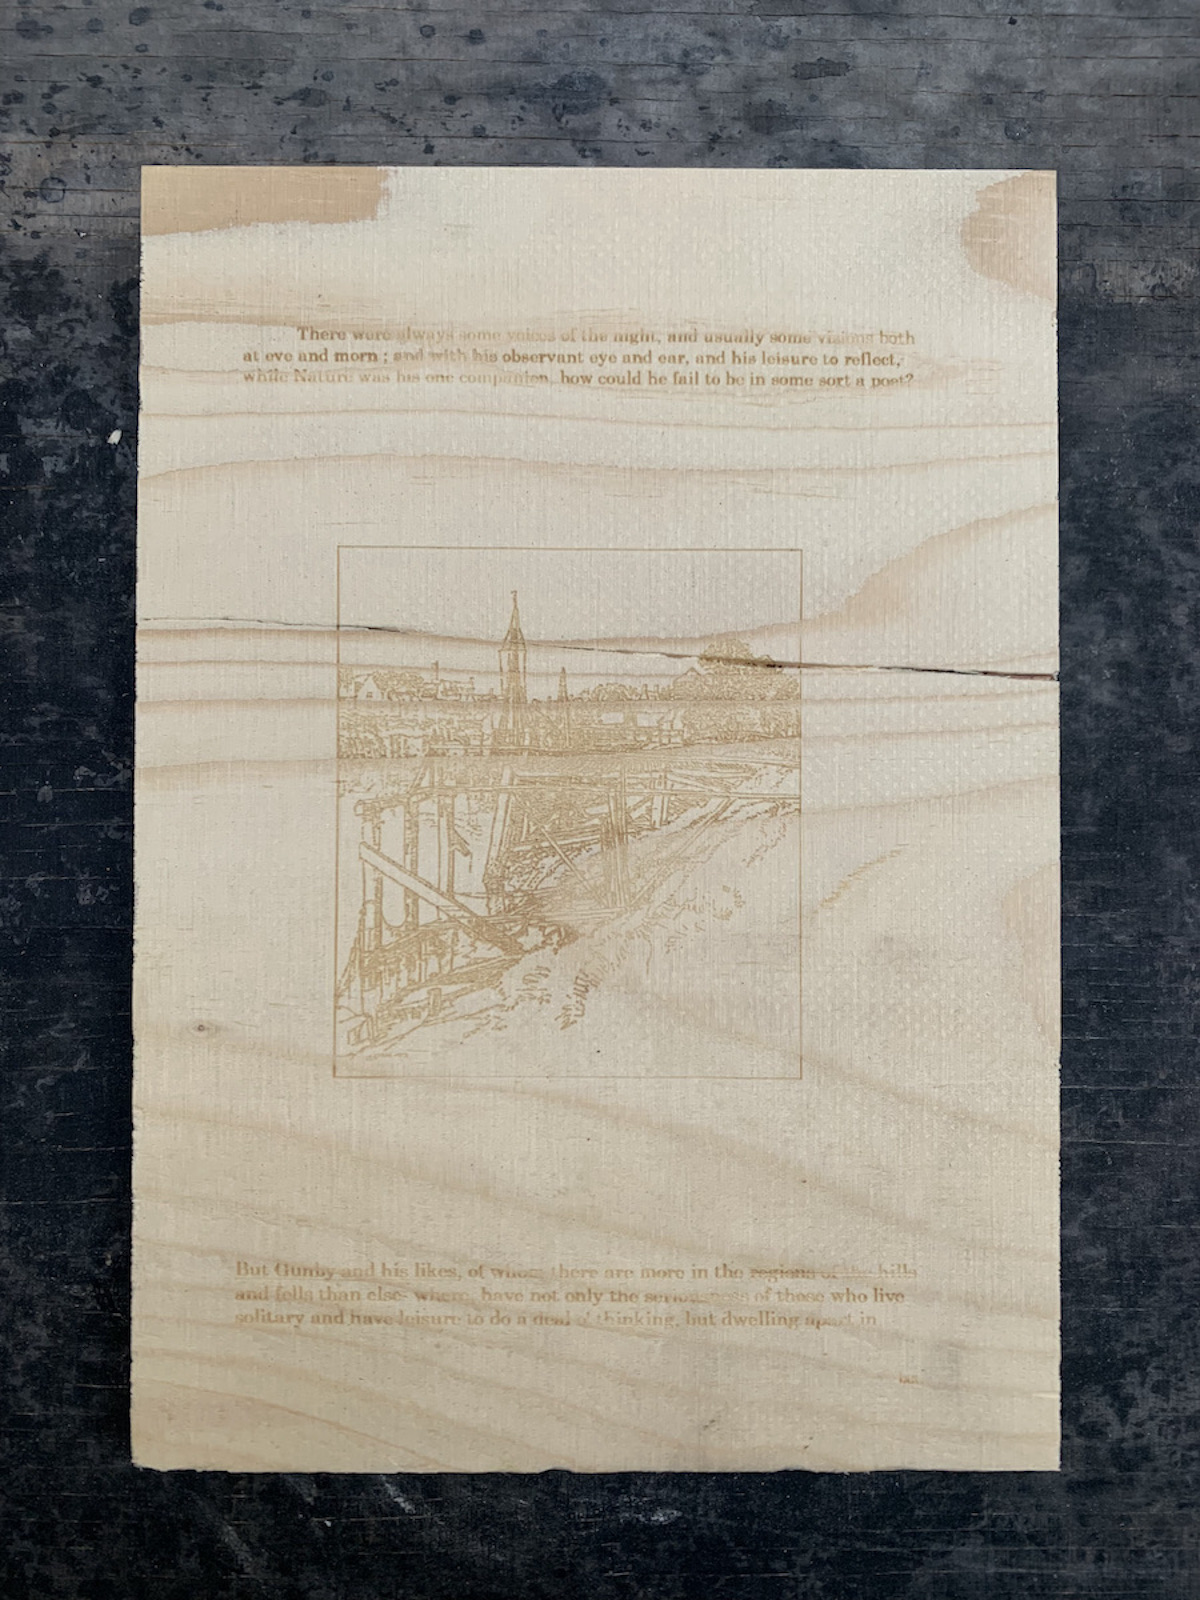 An image of a building, laser-etched on plywood.